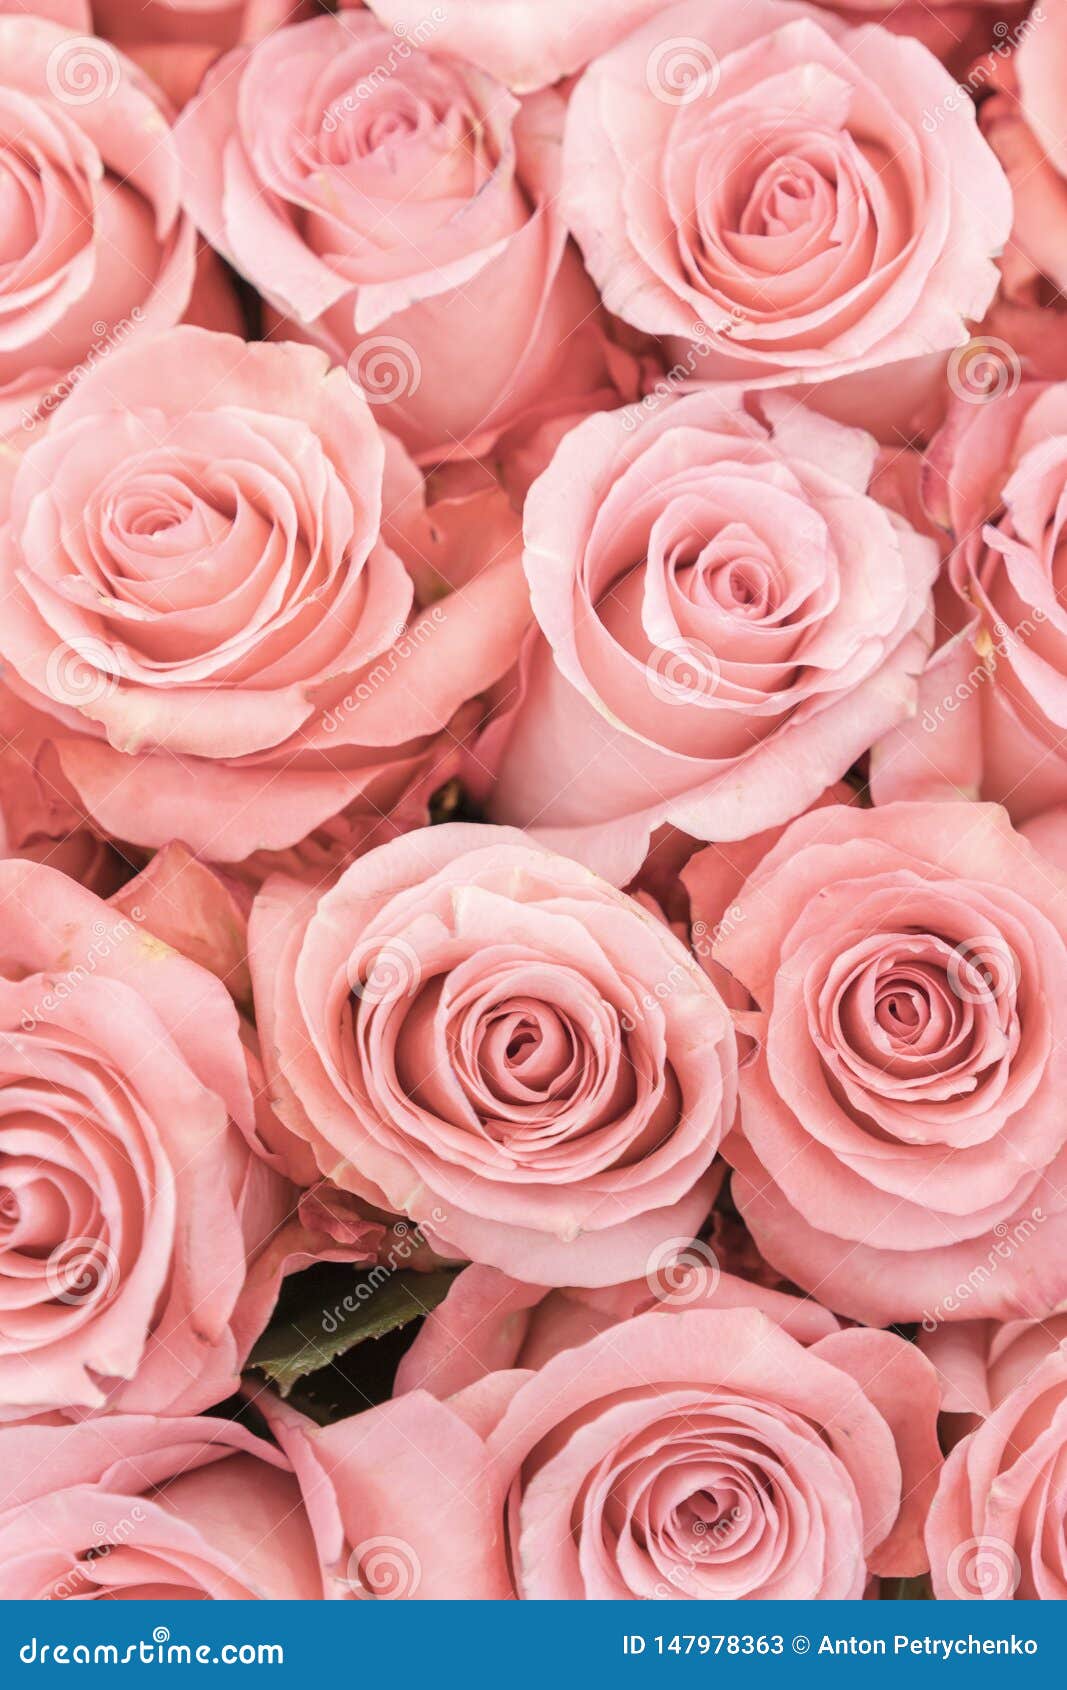 100 Pink Rose Pictures HD  Download Free Images  Stock Photos on  Unsplash